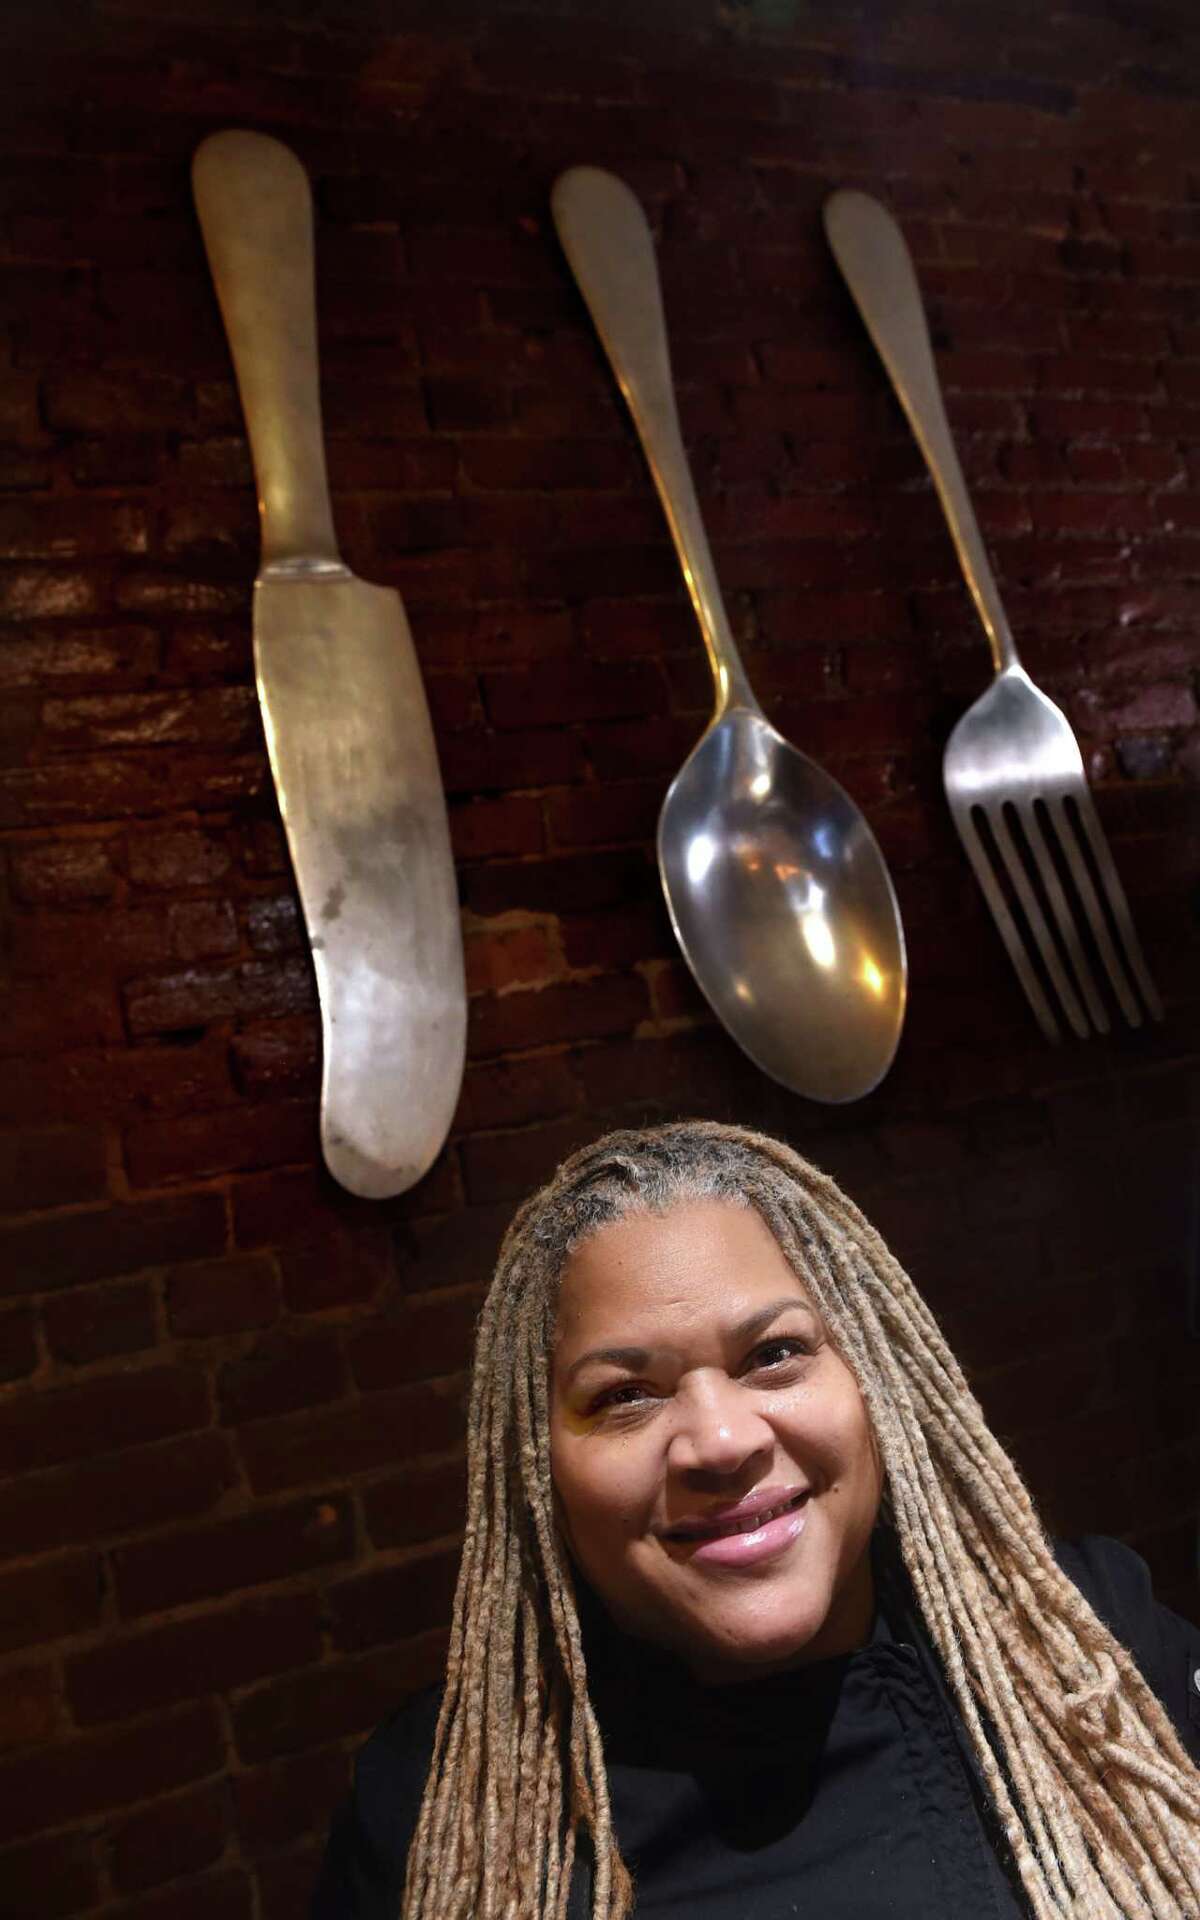 Sandra Pittman, owner of Sandra's Next Generation, is photographed at her restaurant on Congress Avenue in New Haven.